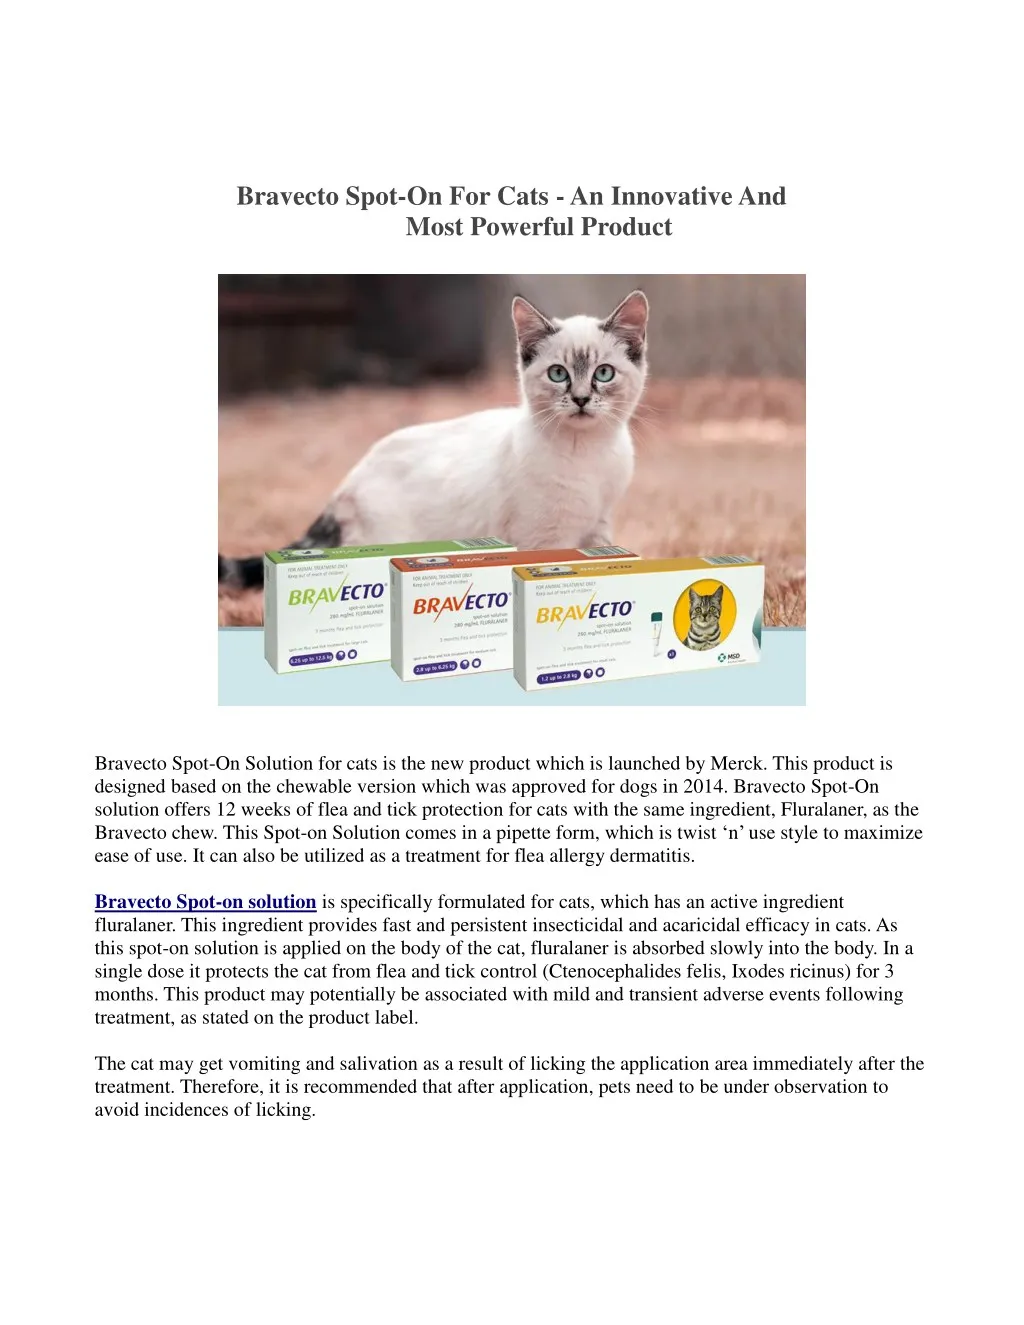 bravecto spot on for cats an innovative and most